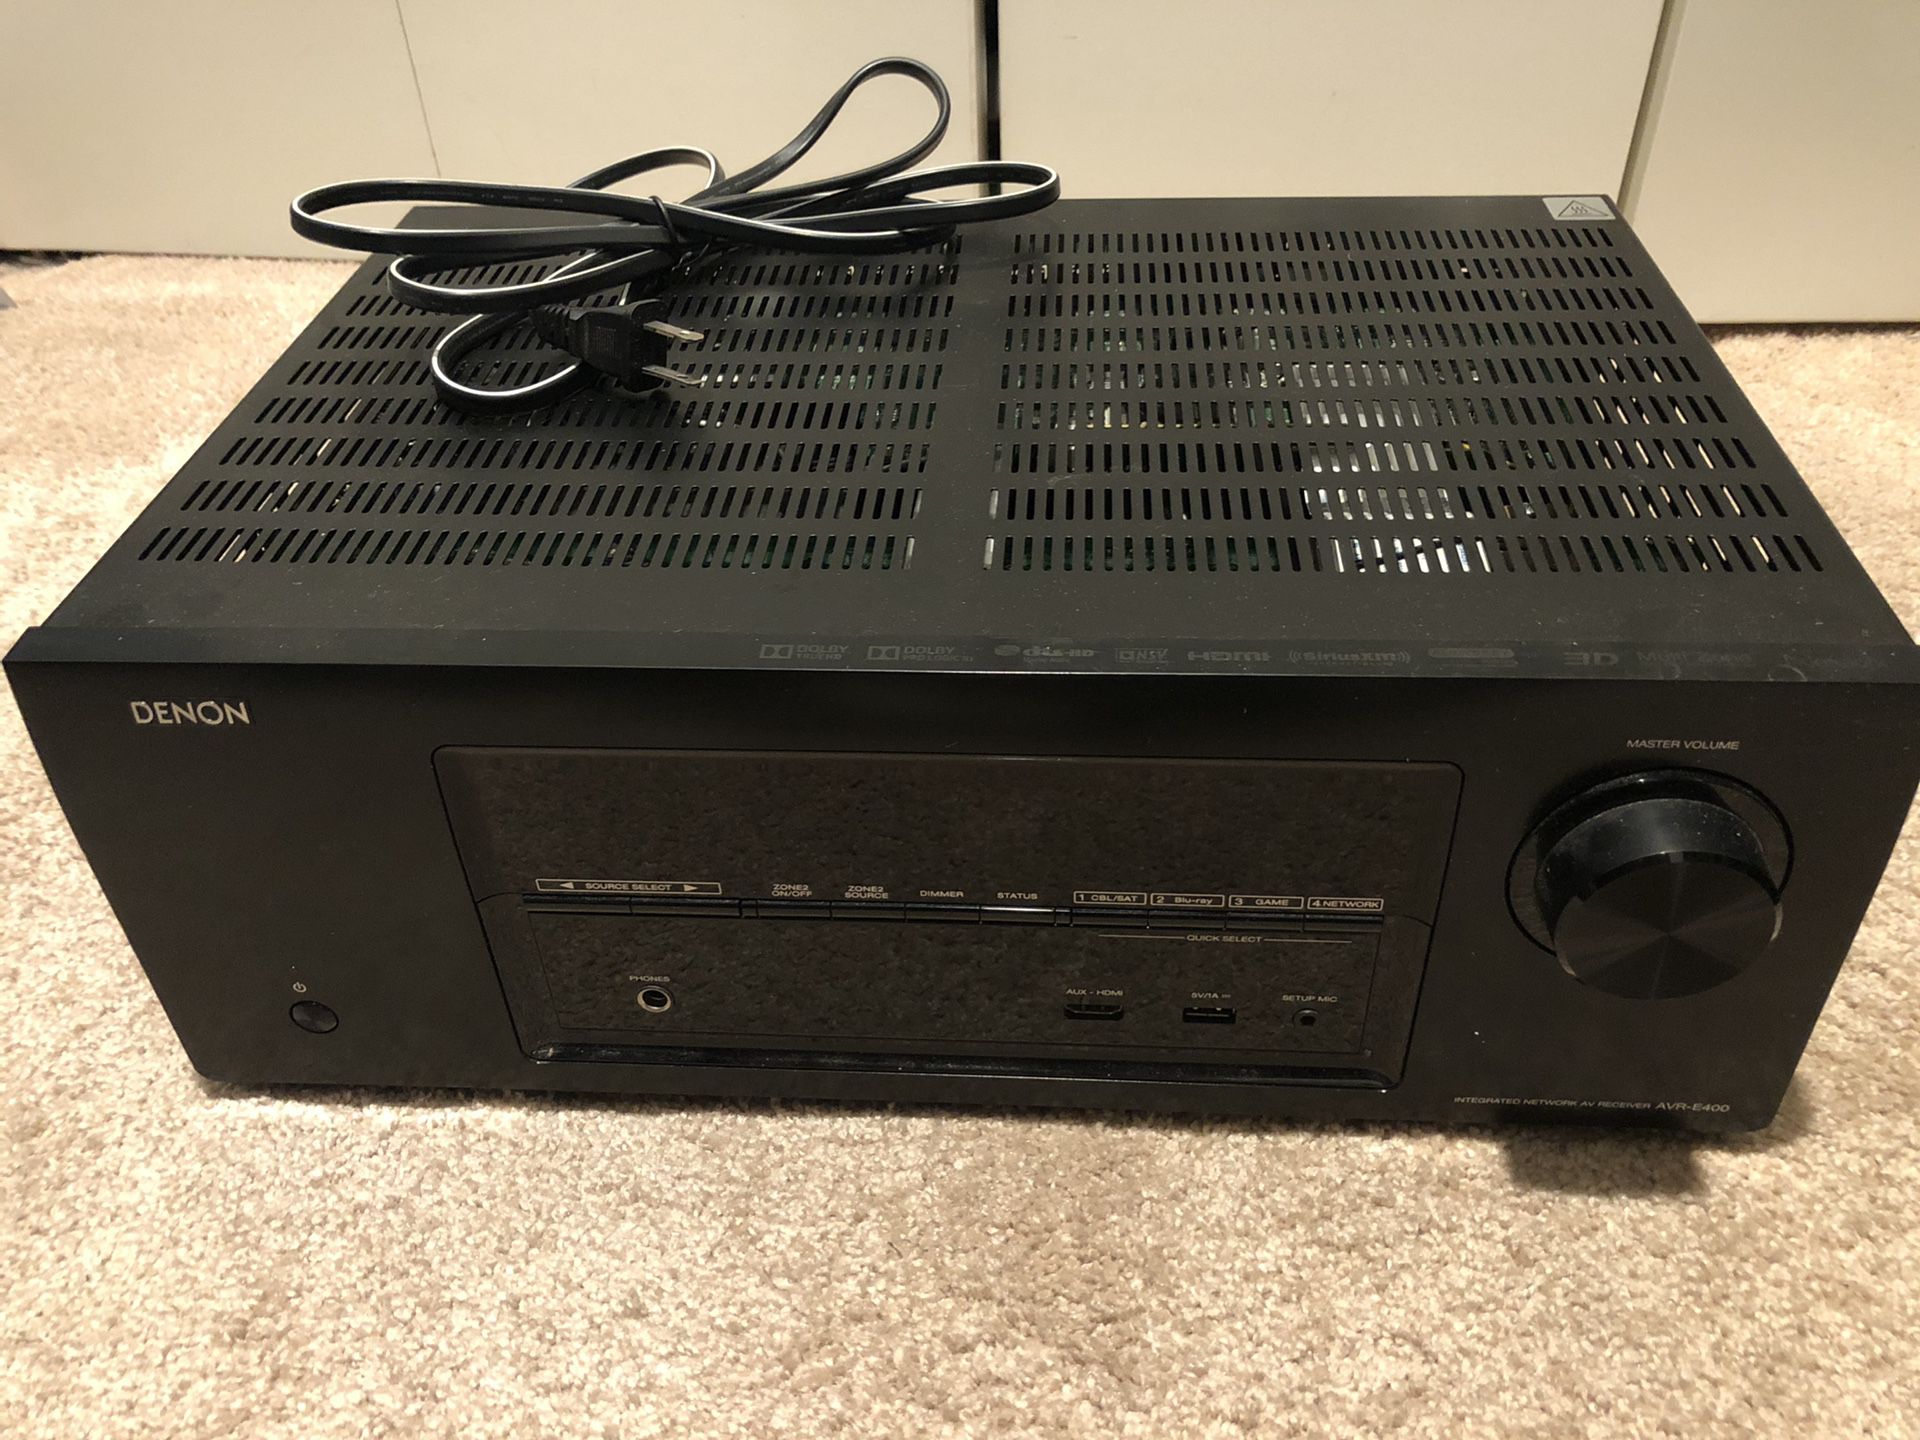 Denon AVR-E400 - 7.1 channel, 4K receiver with wired networking